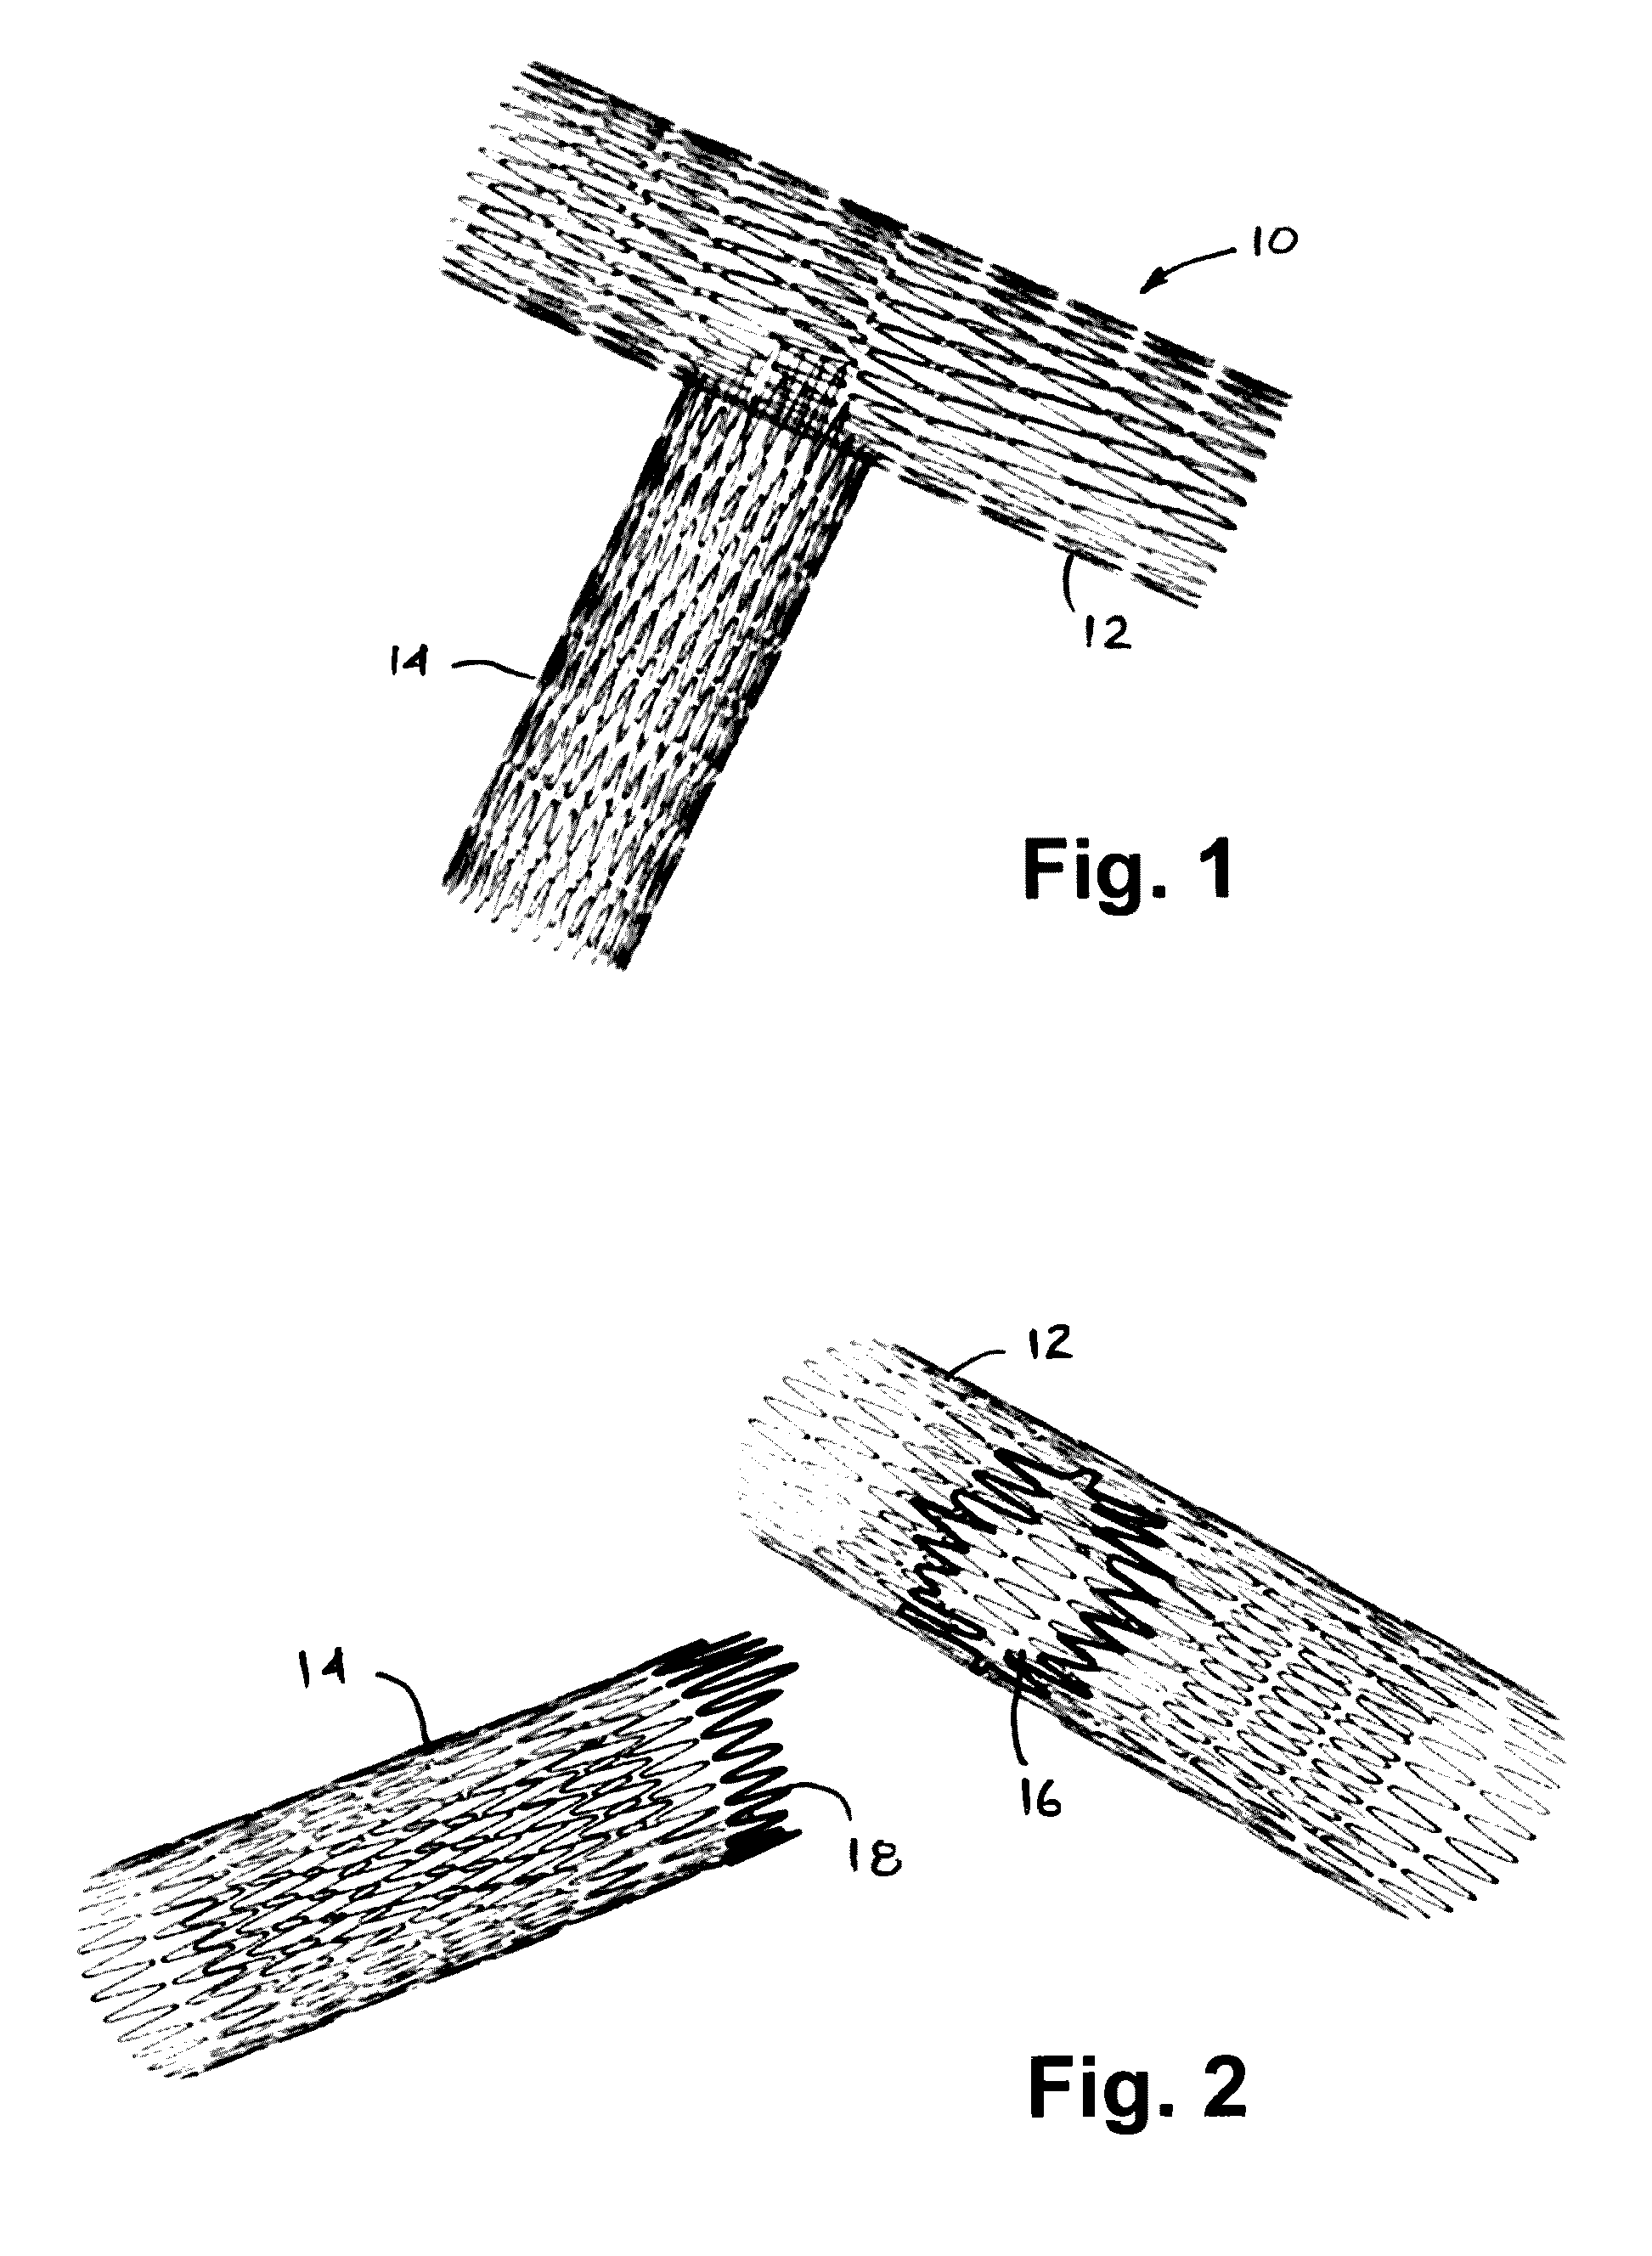 Stent system, deployment apparatus and method for bifurcated lesion